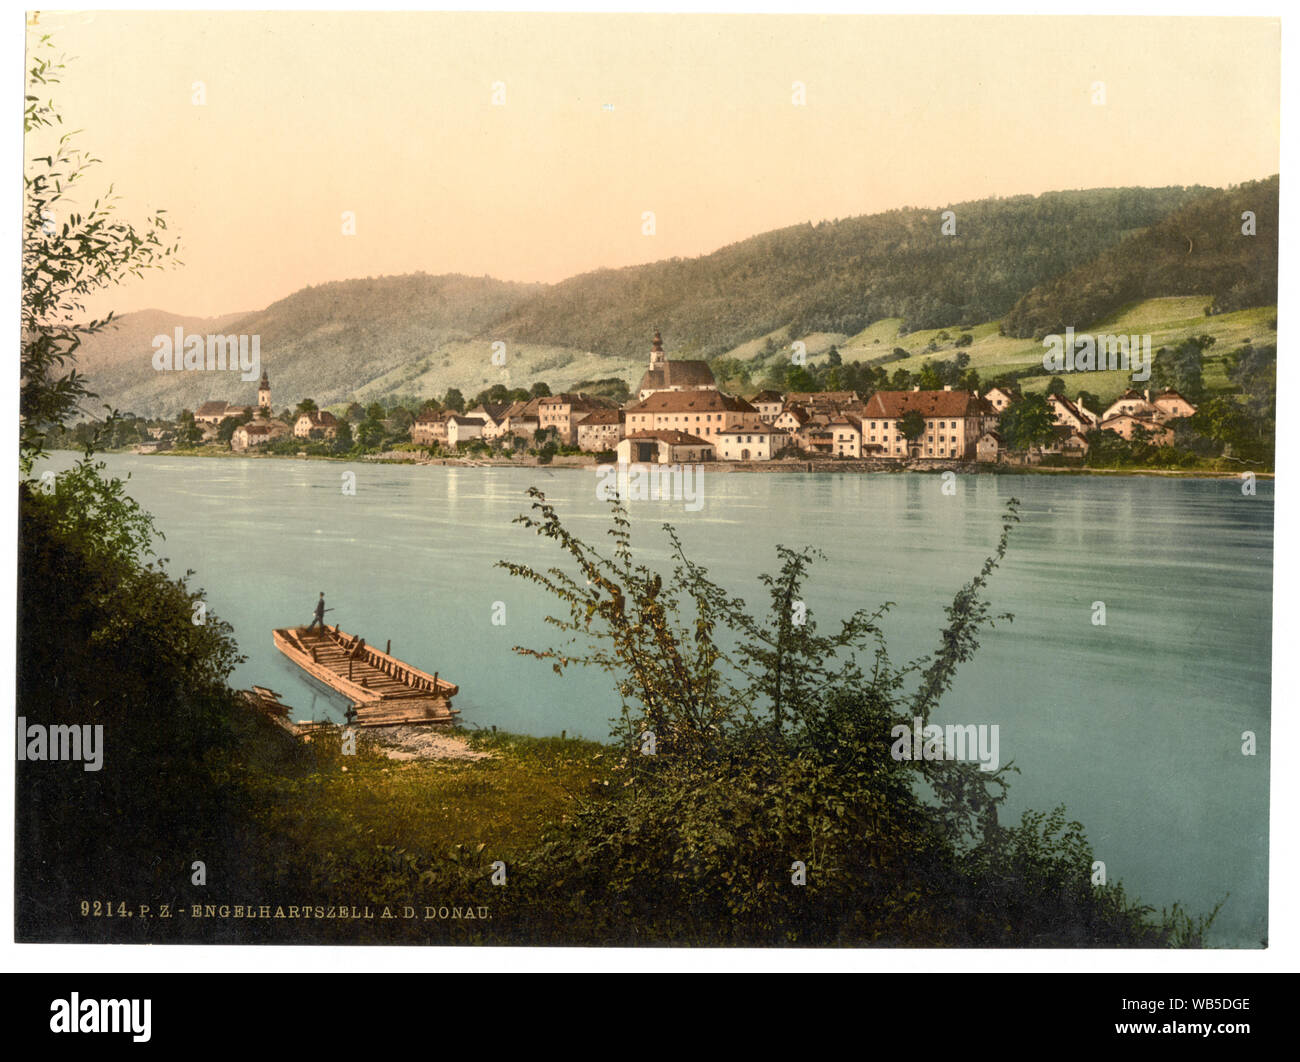 Engelhartzell (i.e., Engelhartszell), Upper Austria, Austro-Hungary; Forms part of: Views of the Austro-Hungarian Empire in the Photochrom print collection.; Title from the Detroit Publishing Co., Catalogue J-foreign section, Detroit, Mich. : Detroit Publishing Company, 1905.; Print no. 9214. Stock Photo